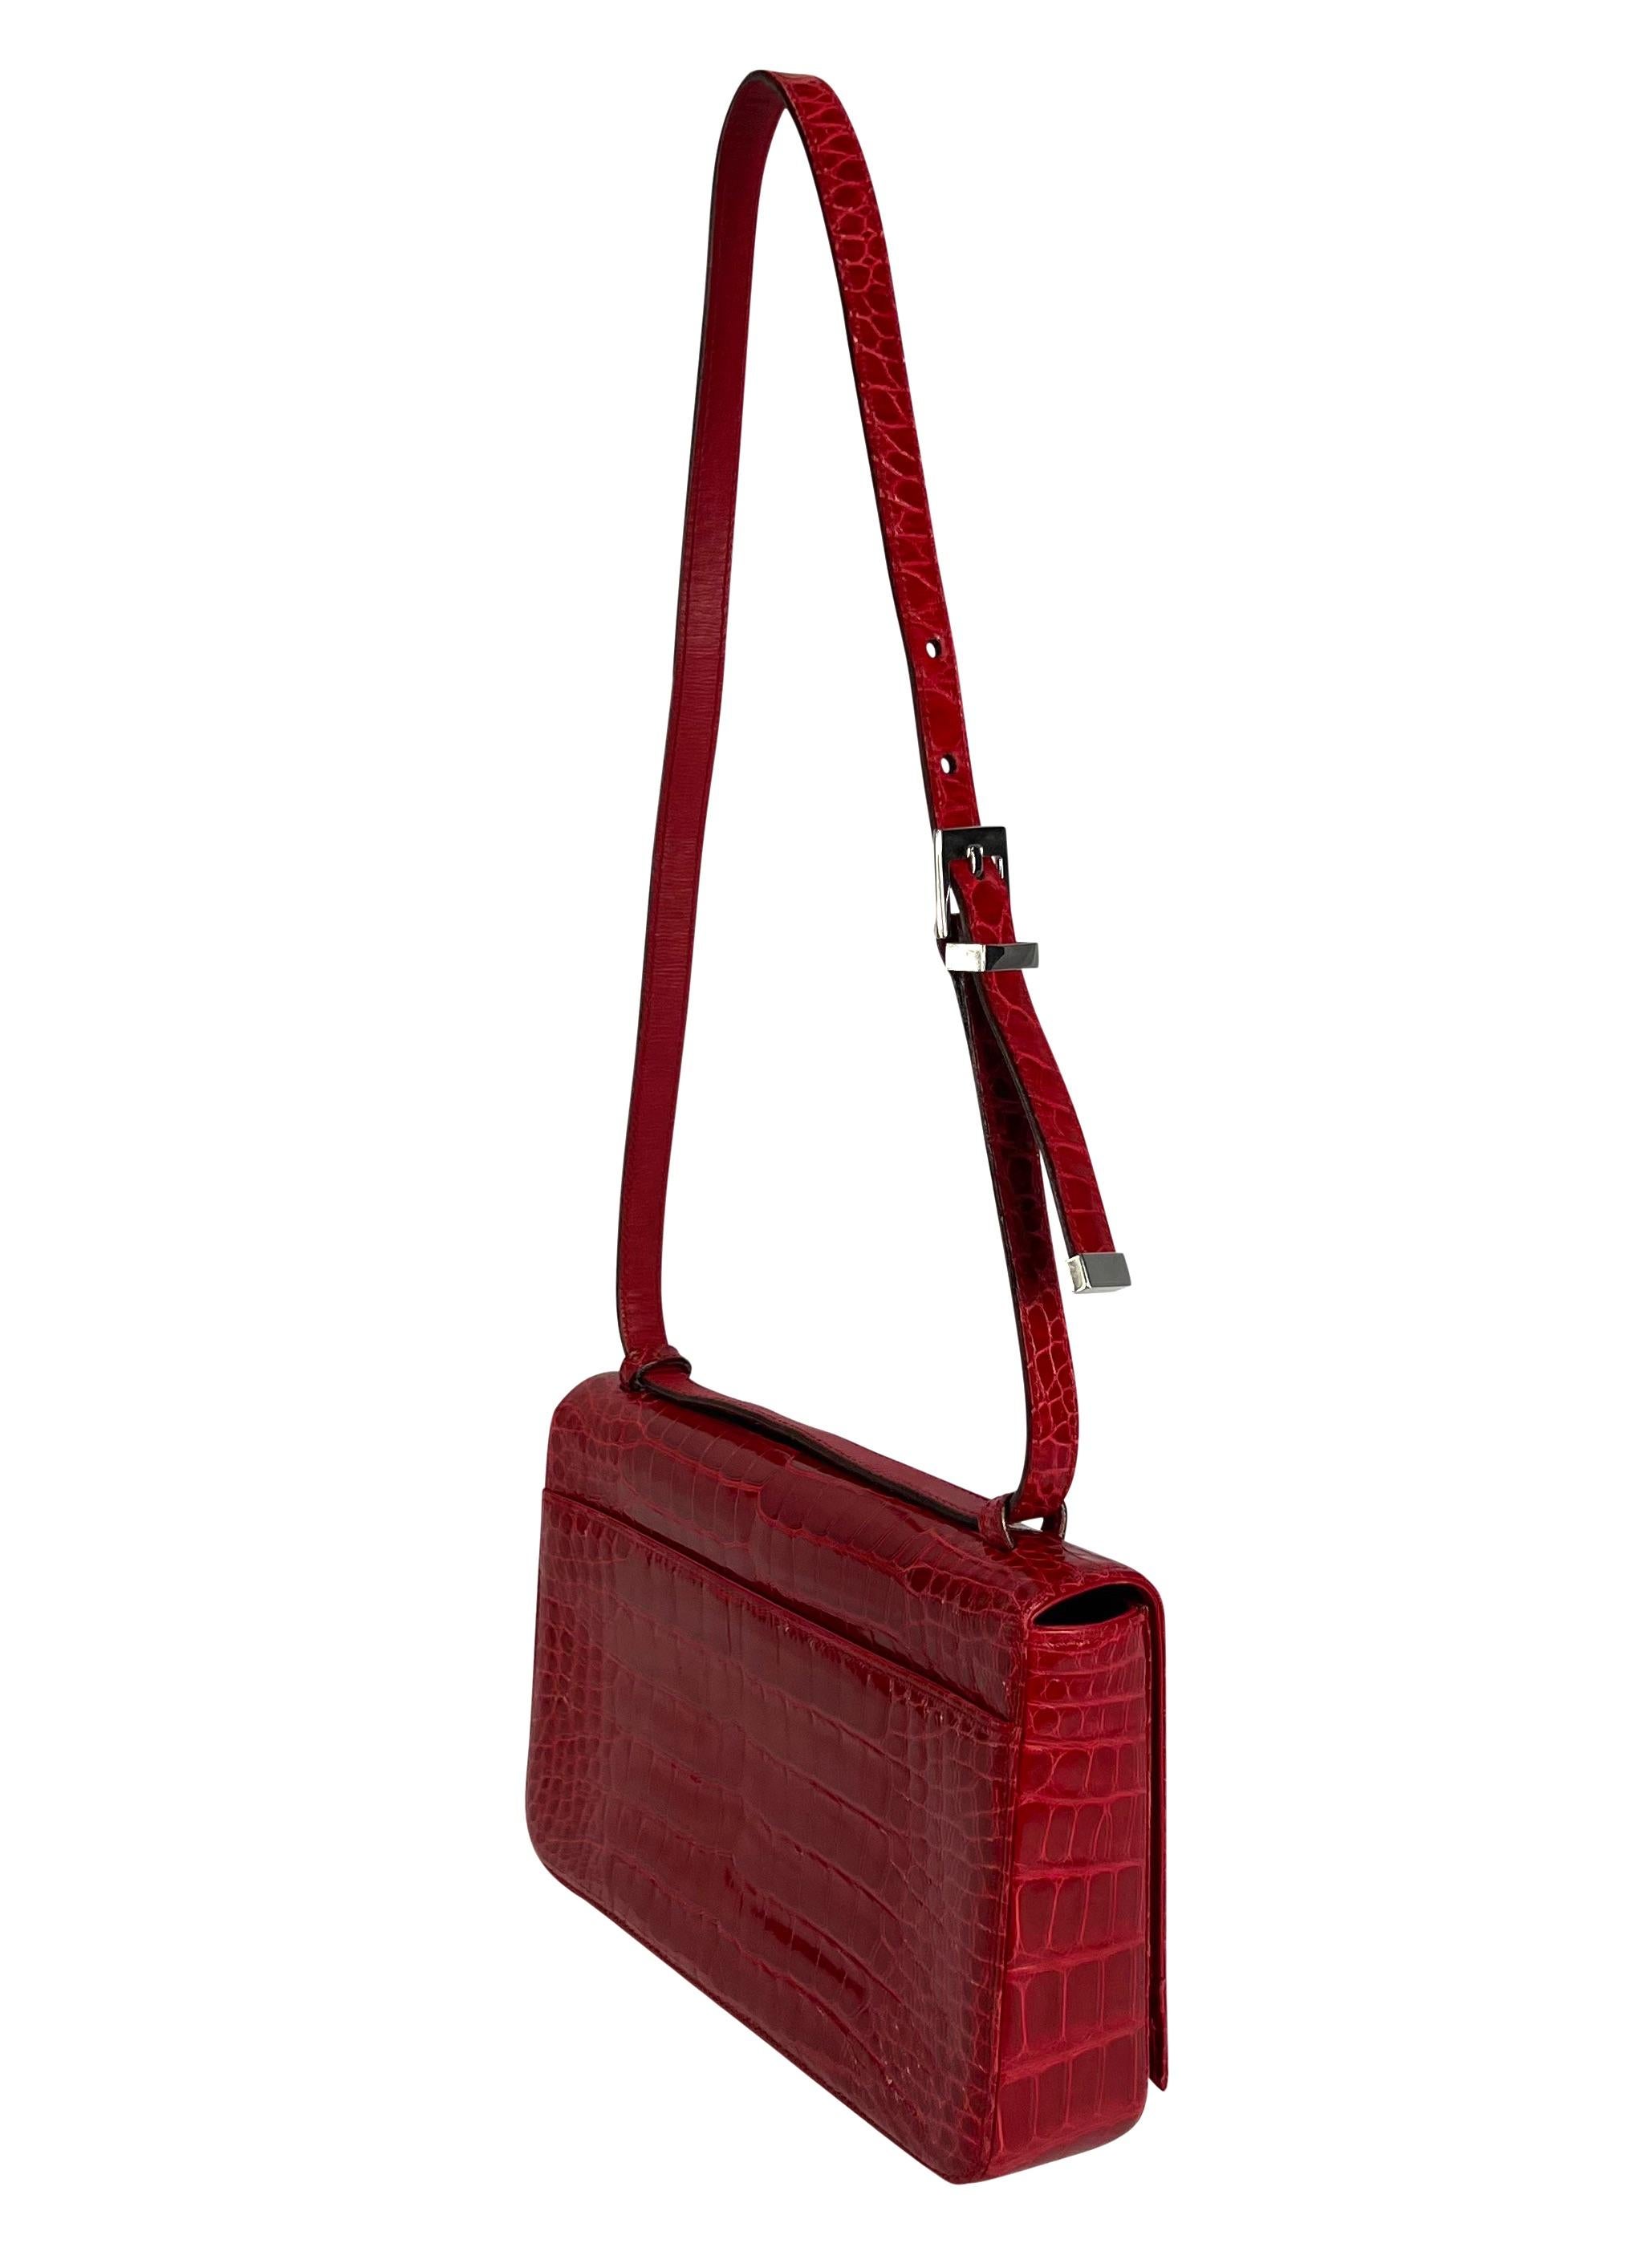 S/S 1998 Gucci by Tom Ford Runway Red Alligator Adjustable Crossbody G Logo Bag For Sale 4